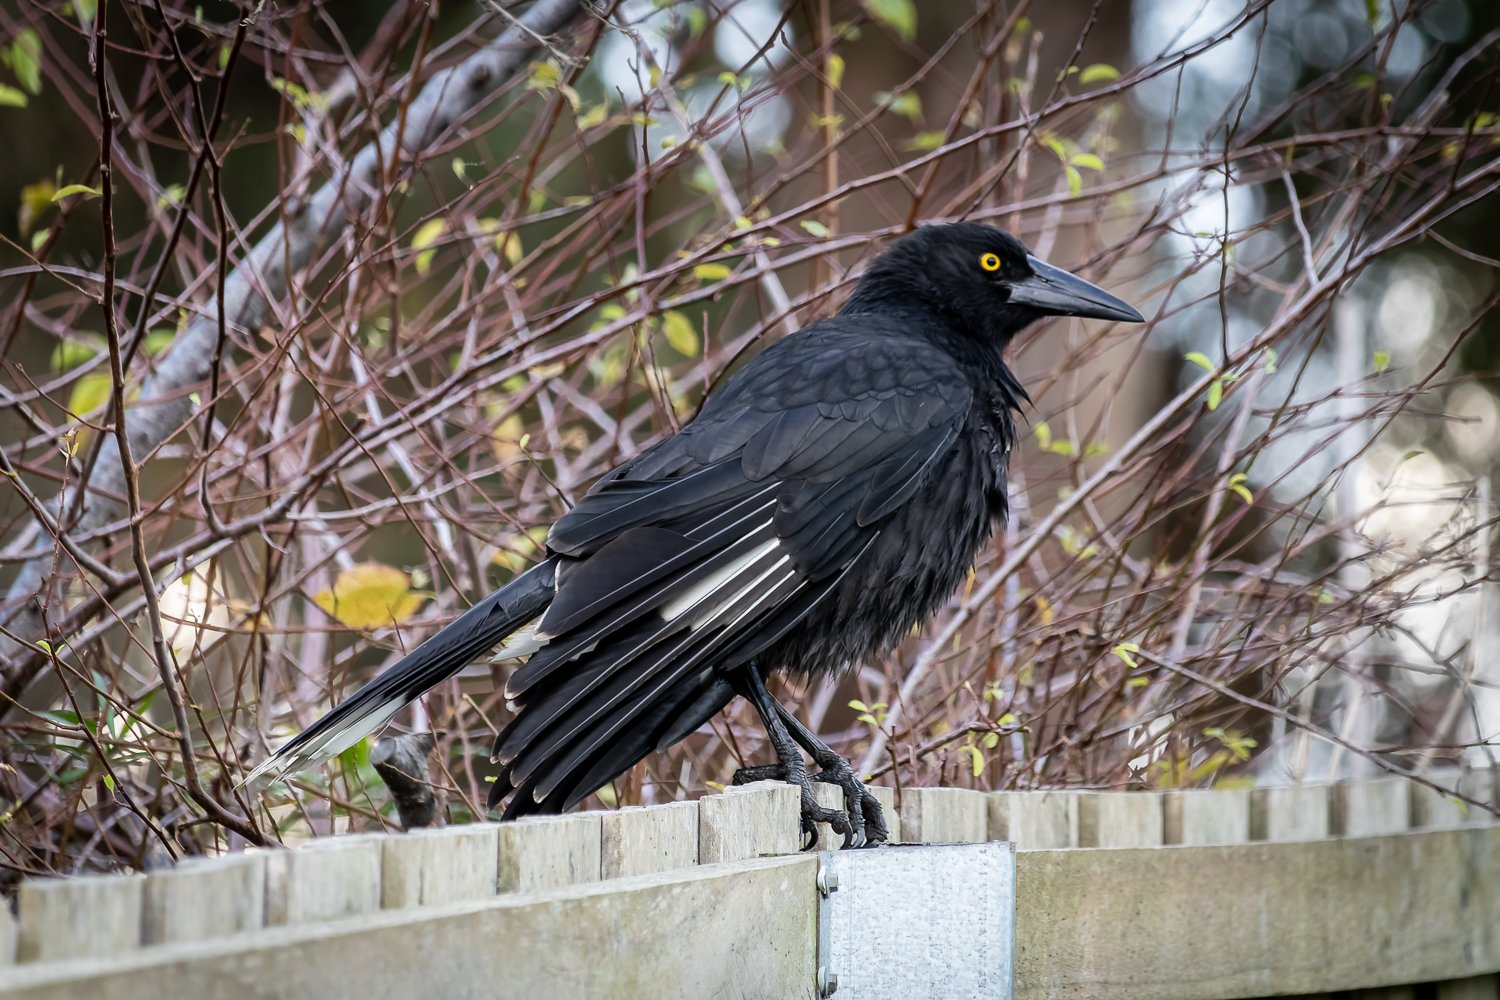 A large black bird with an orange eye and white markings on its wings standing on a fence. Its feathers are slightly wet.